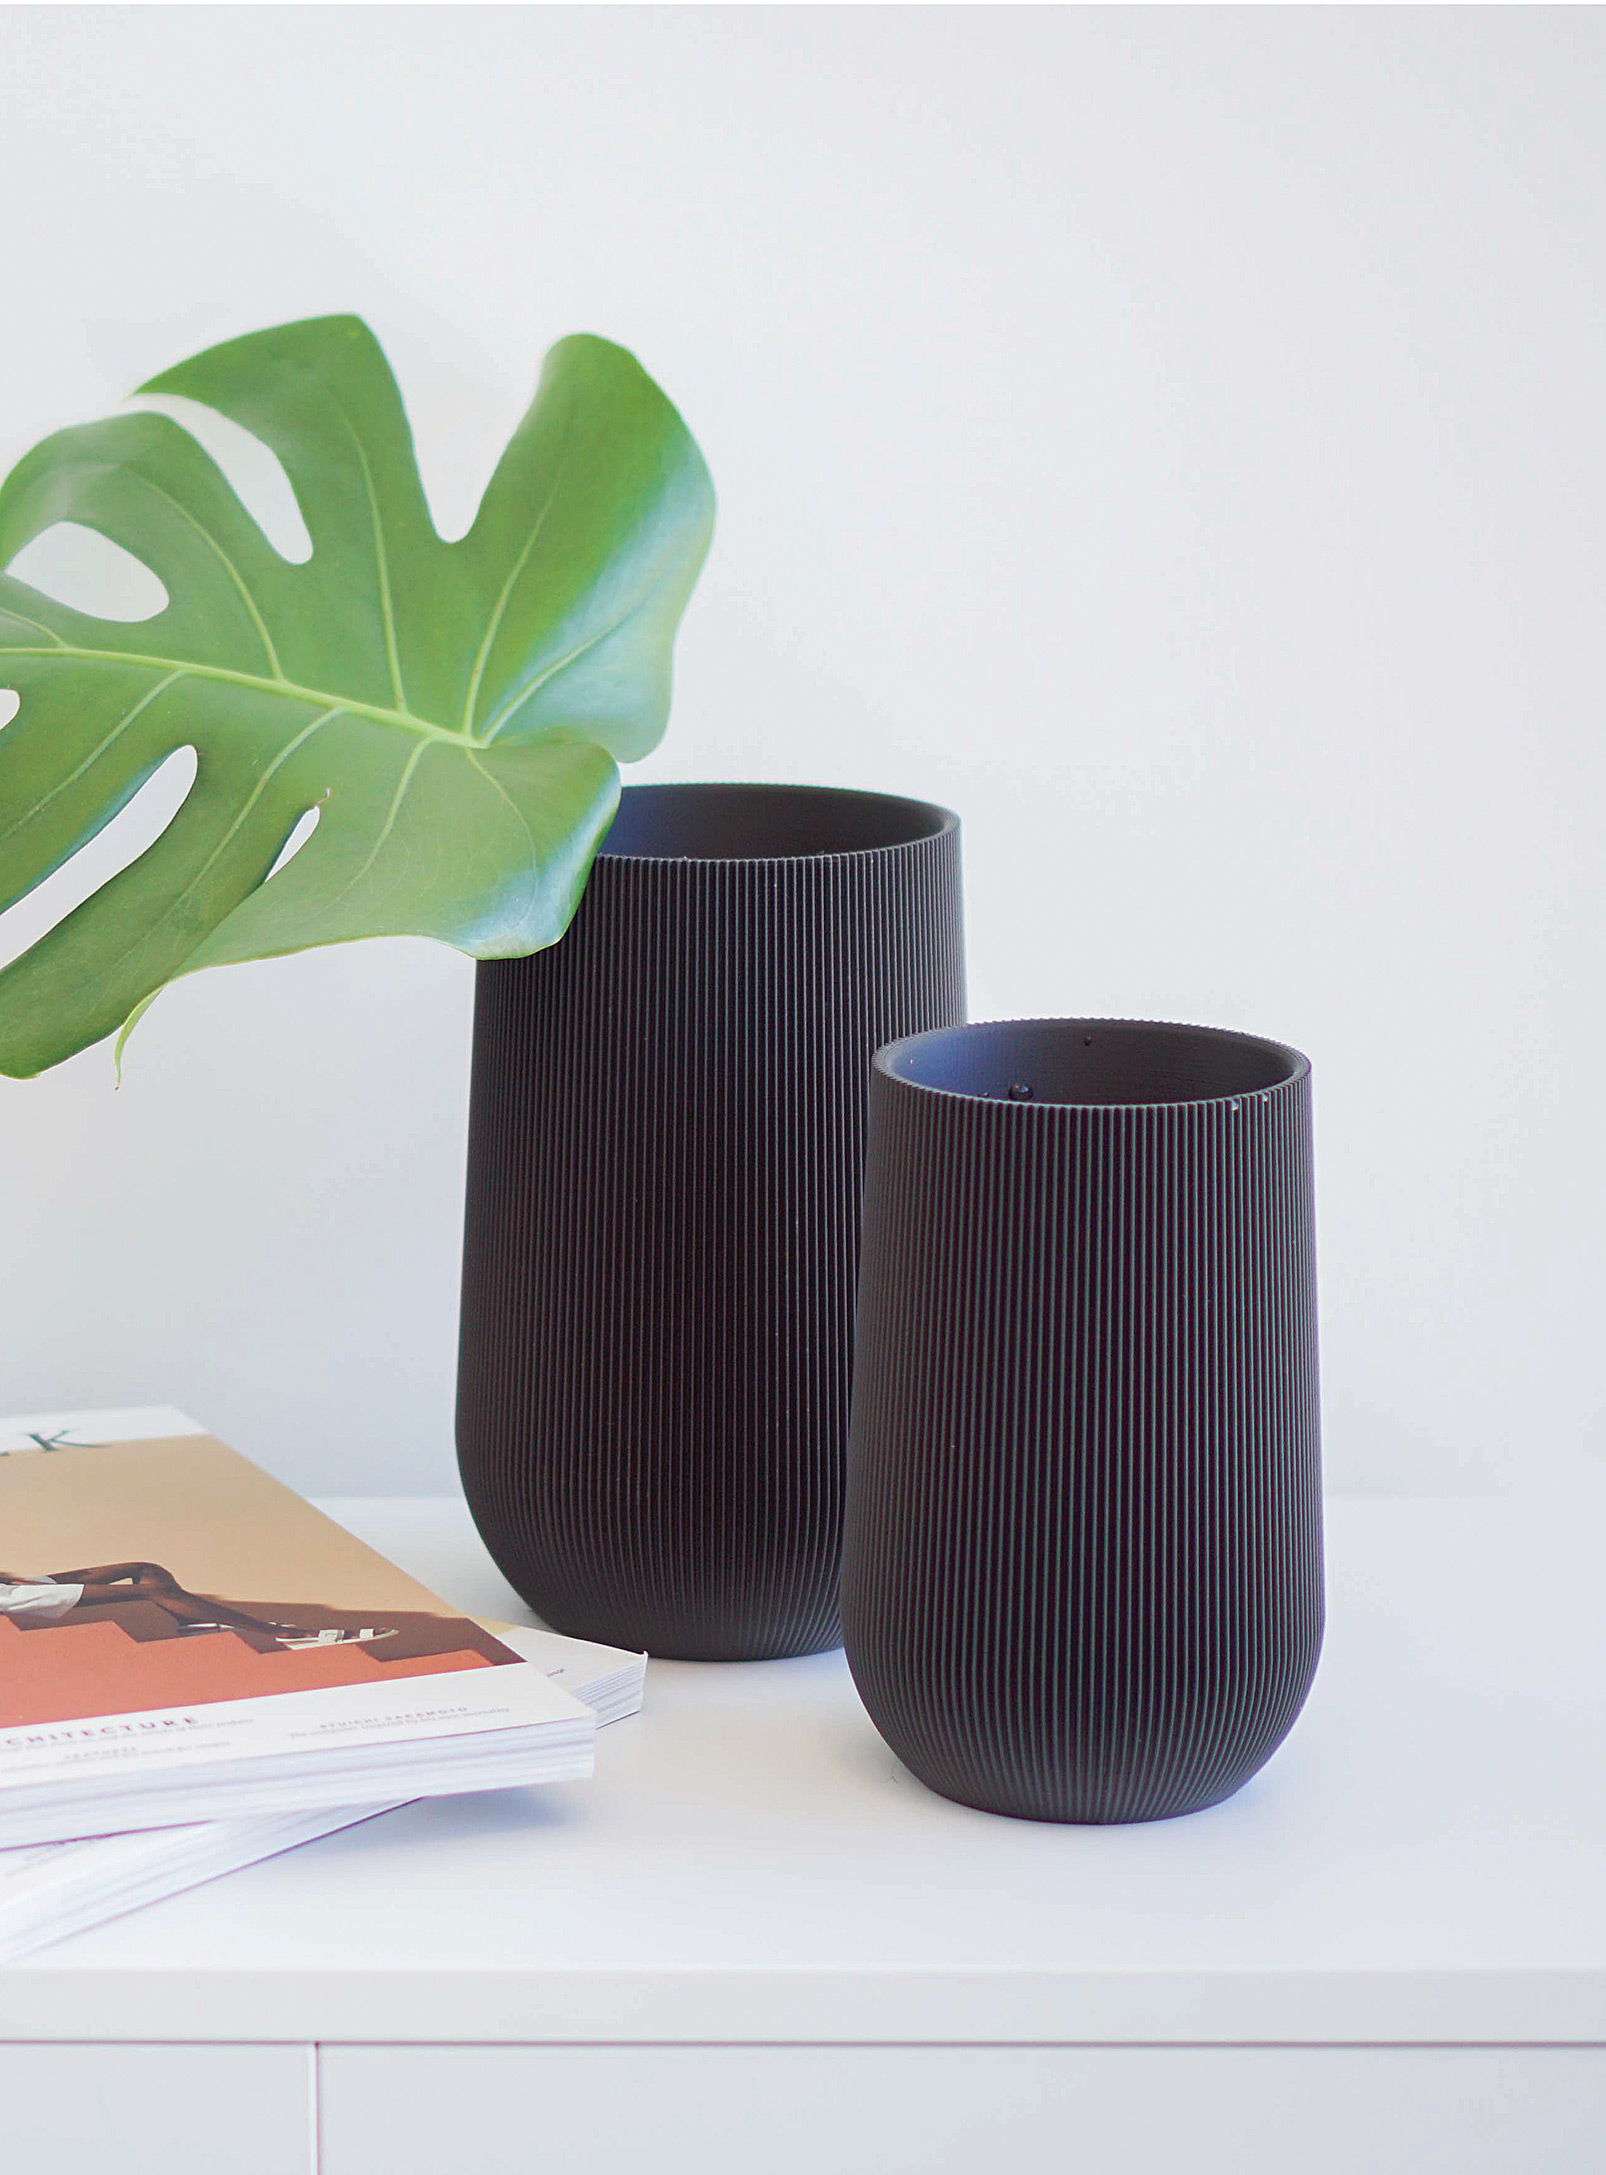 Conifer Homewares Sequoia Plant-based Vase See Available Sizes In Black